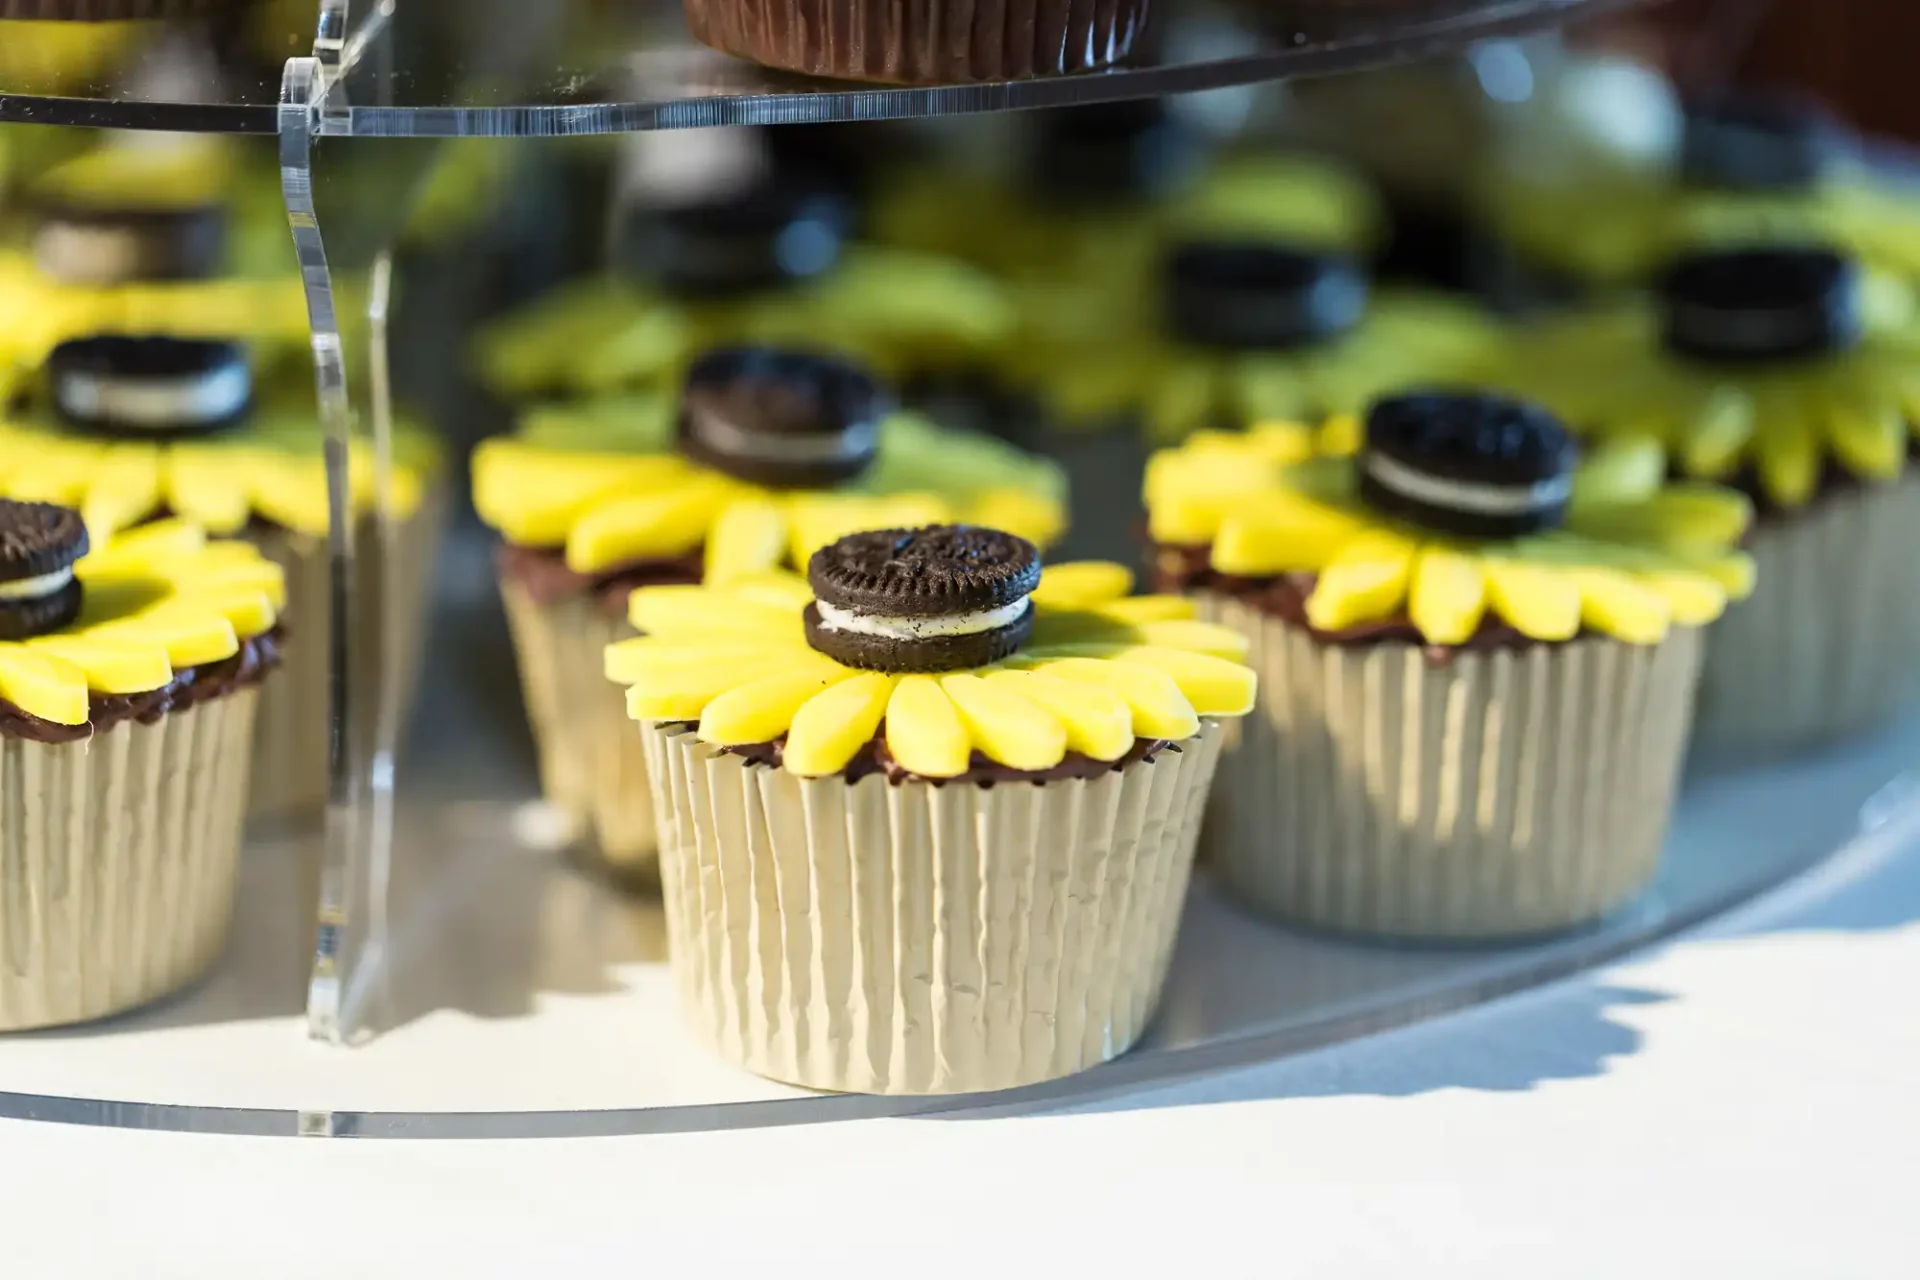 Sunflower-themed cupcakes decorated with yellow petals and a mini oreo cookie in the center, displayed under a clear cover.